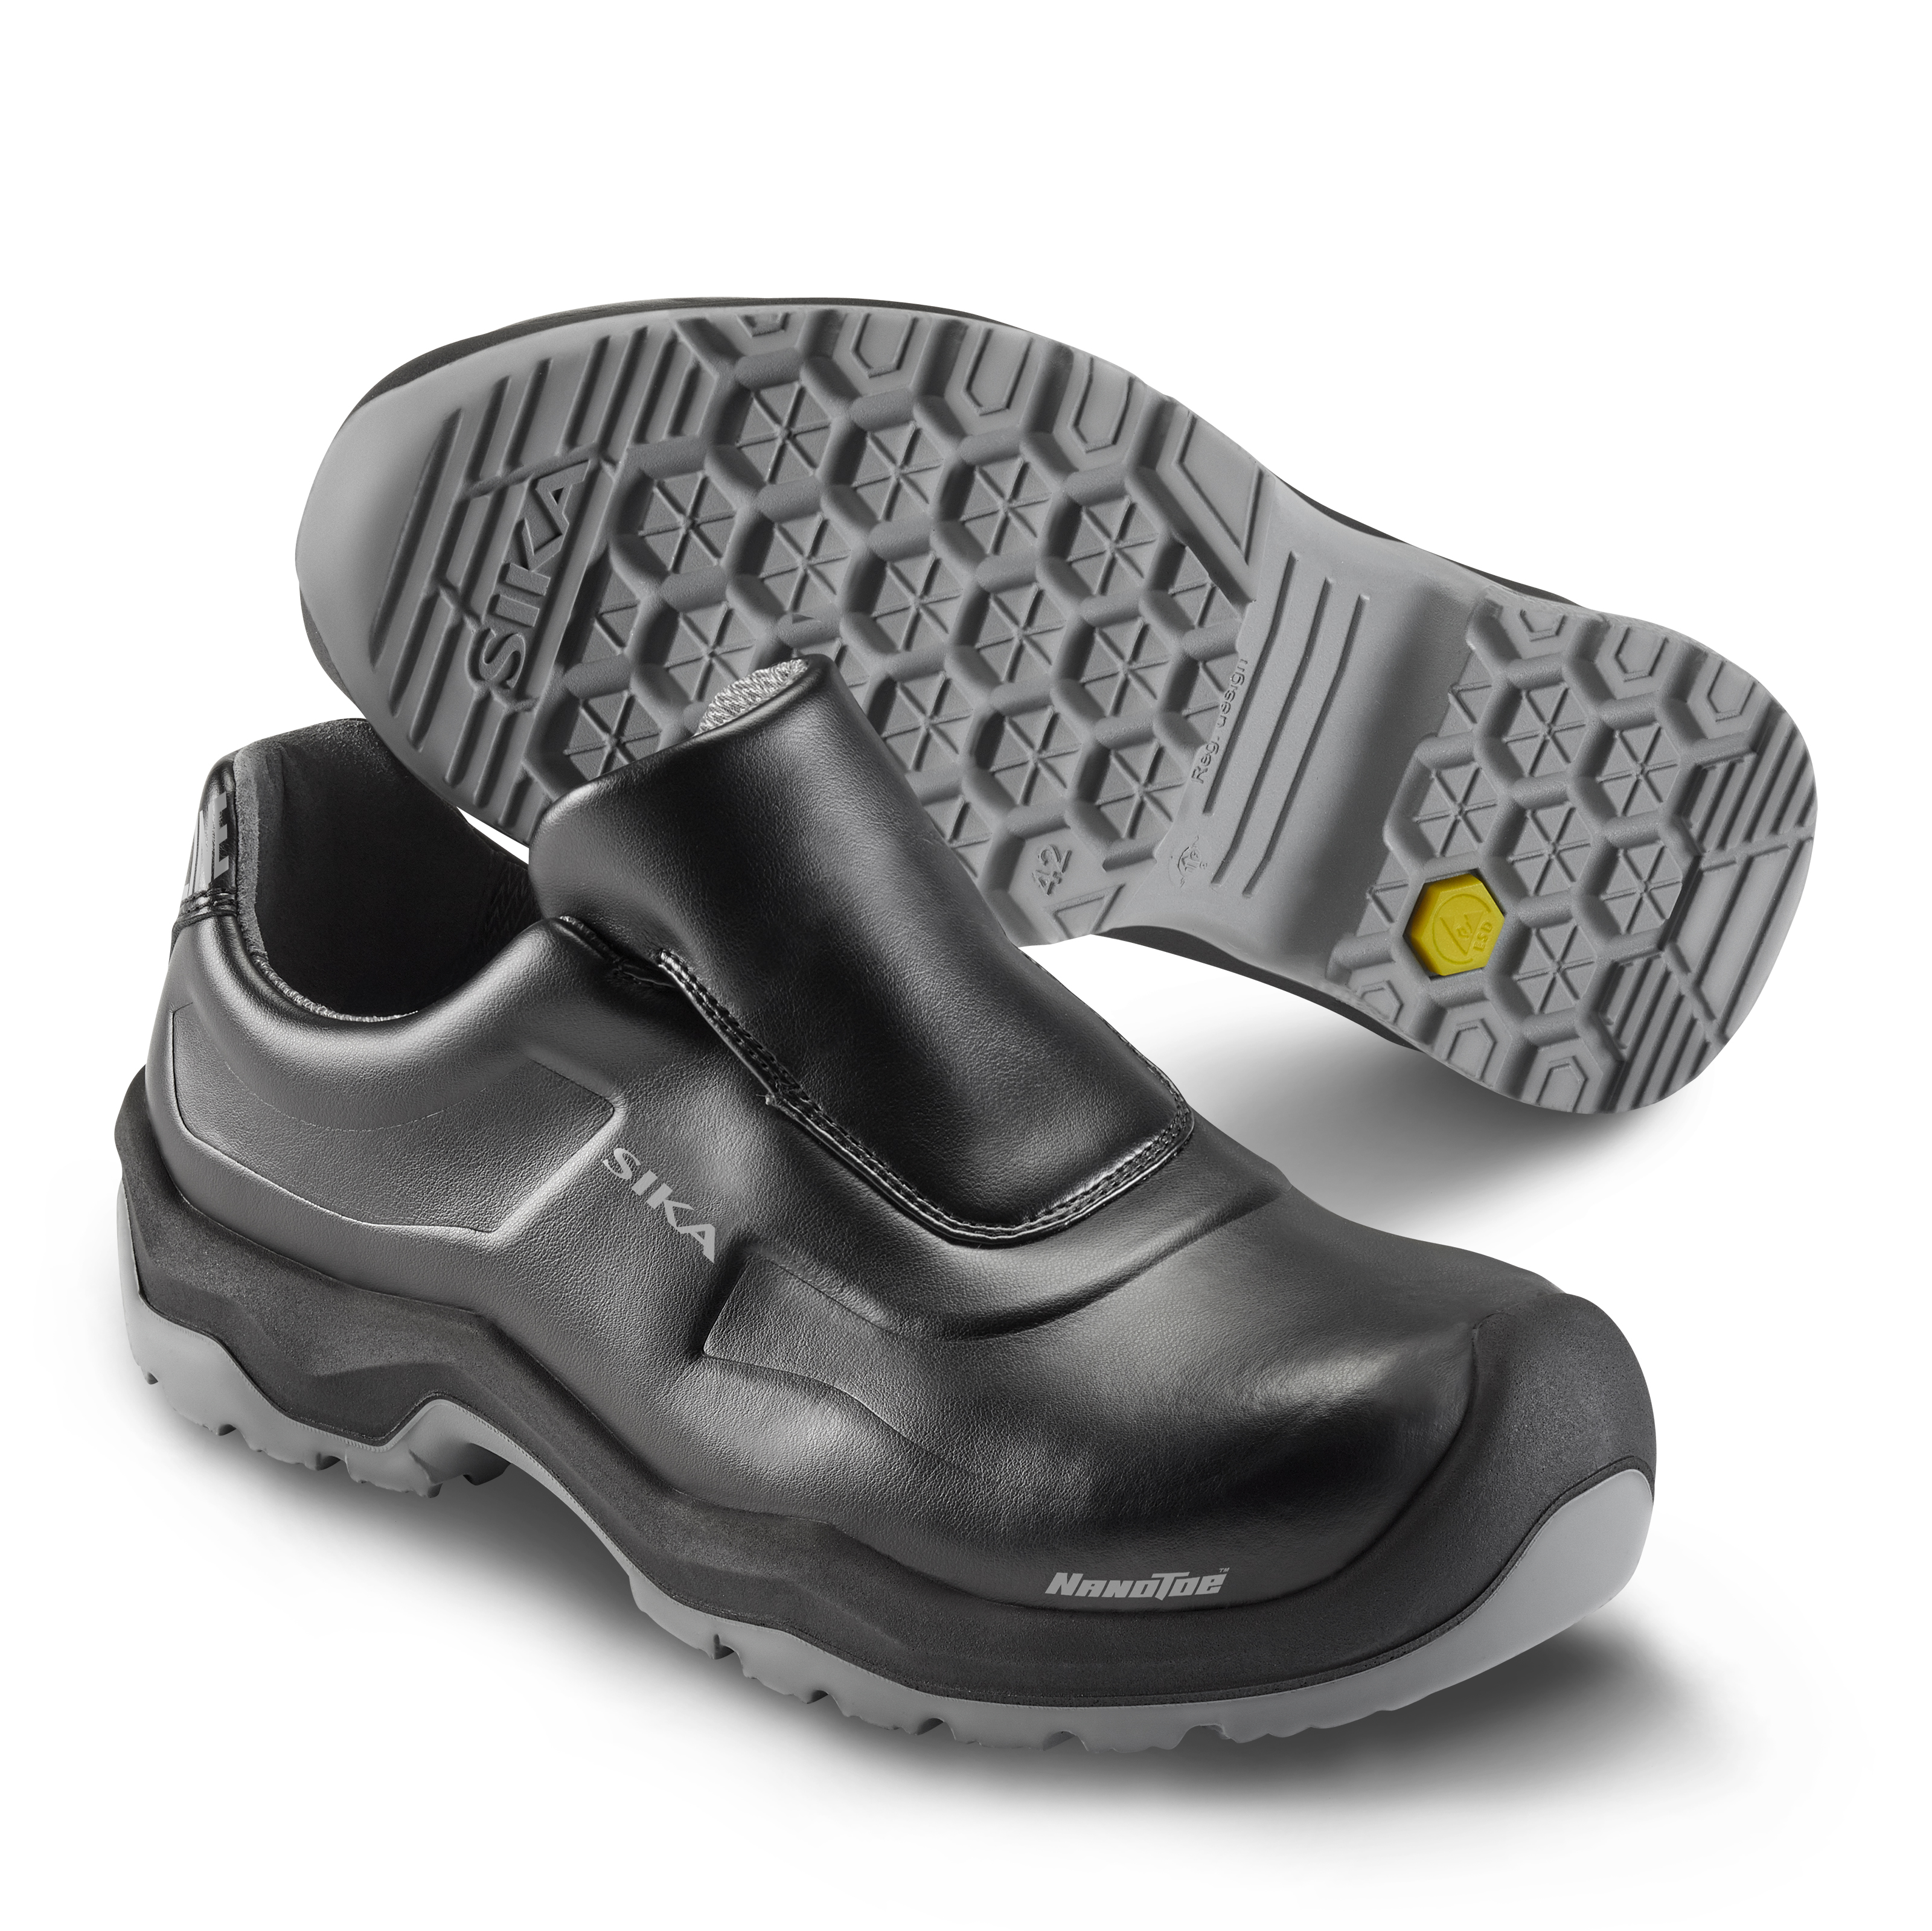 SIKA 202410 First safety shoes. Slip resistant! Shock absorbing!